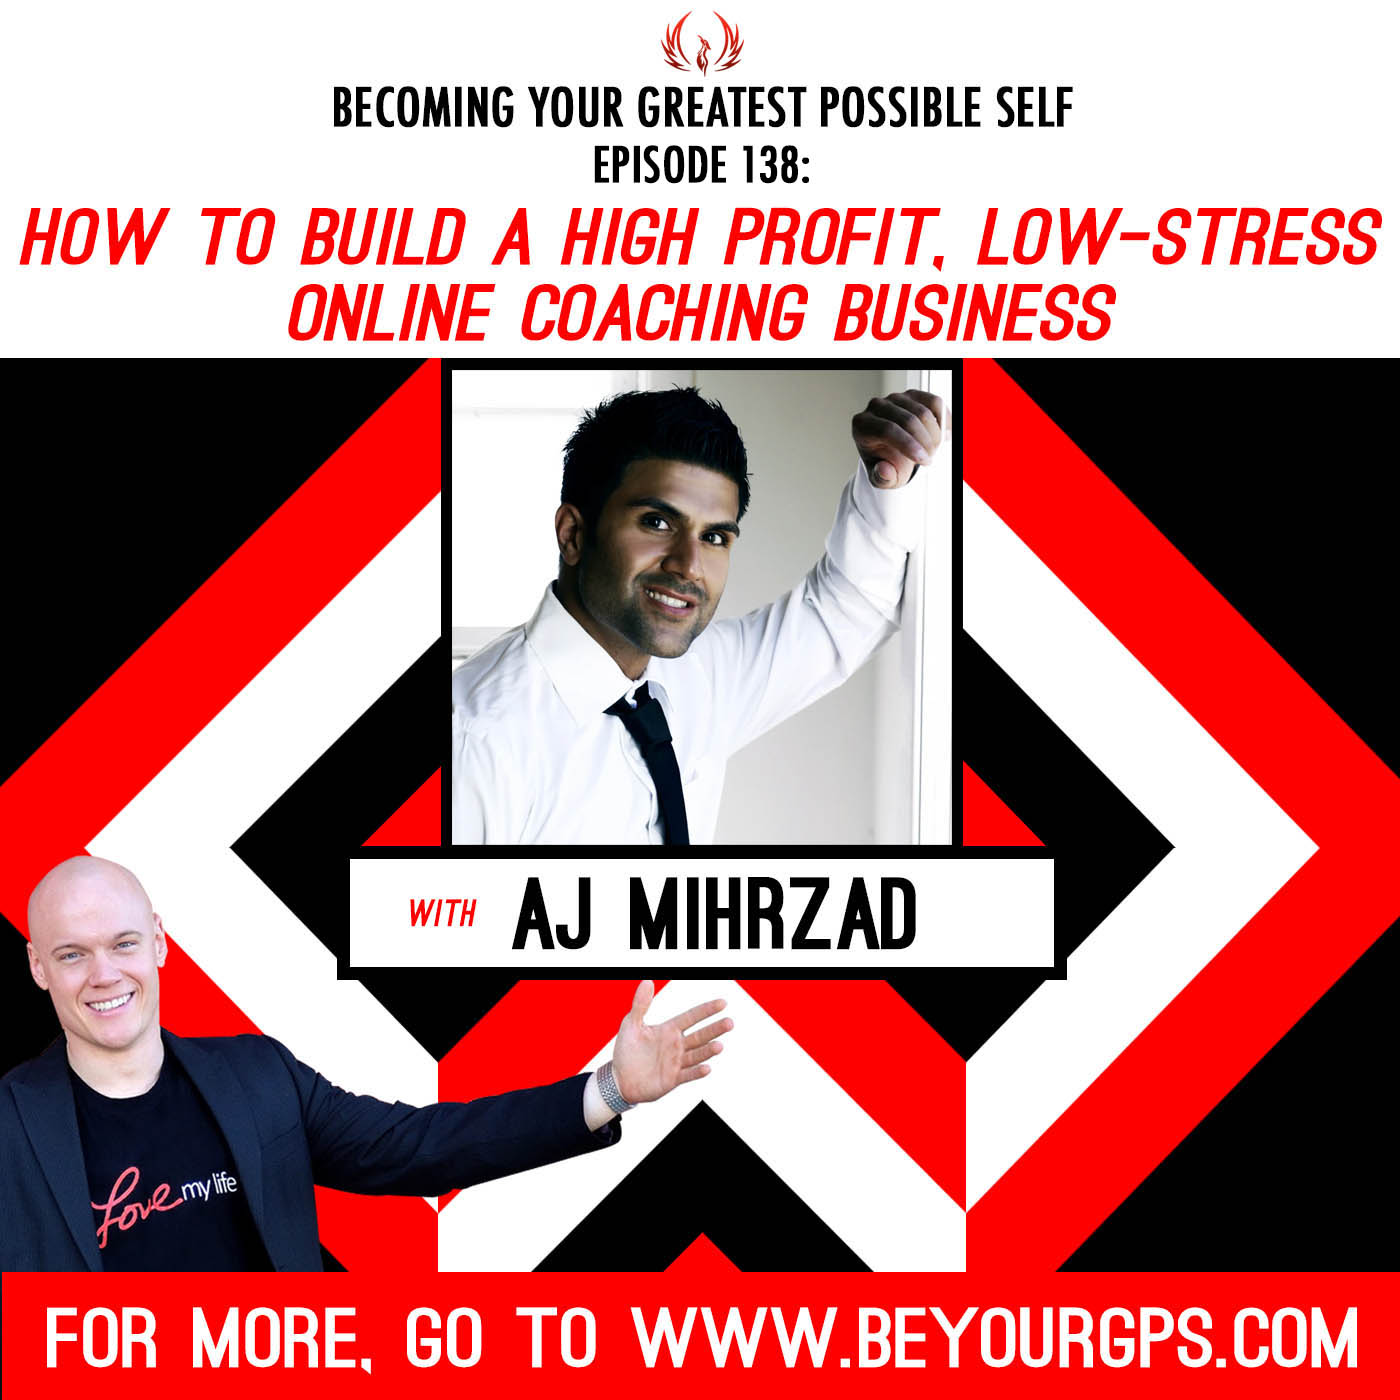 How to Build a High Profit, Low-Stress Online Coaching Business With AJ Mihrzad